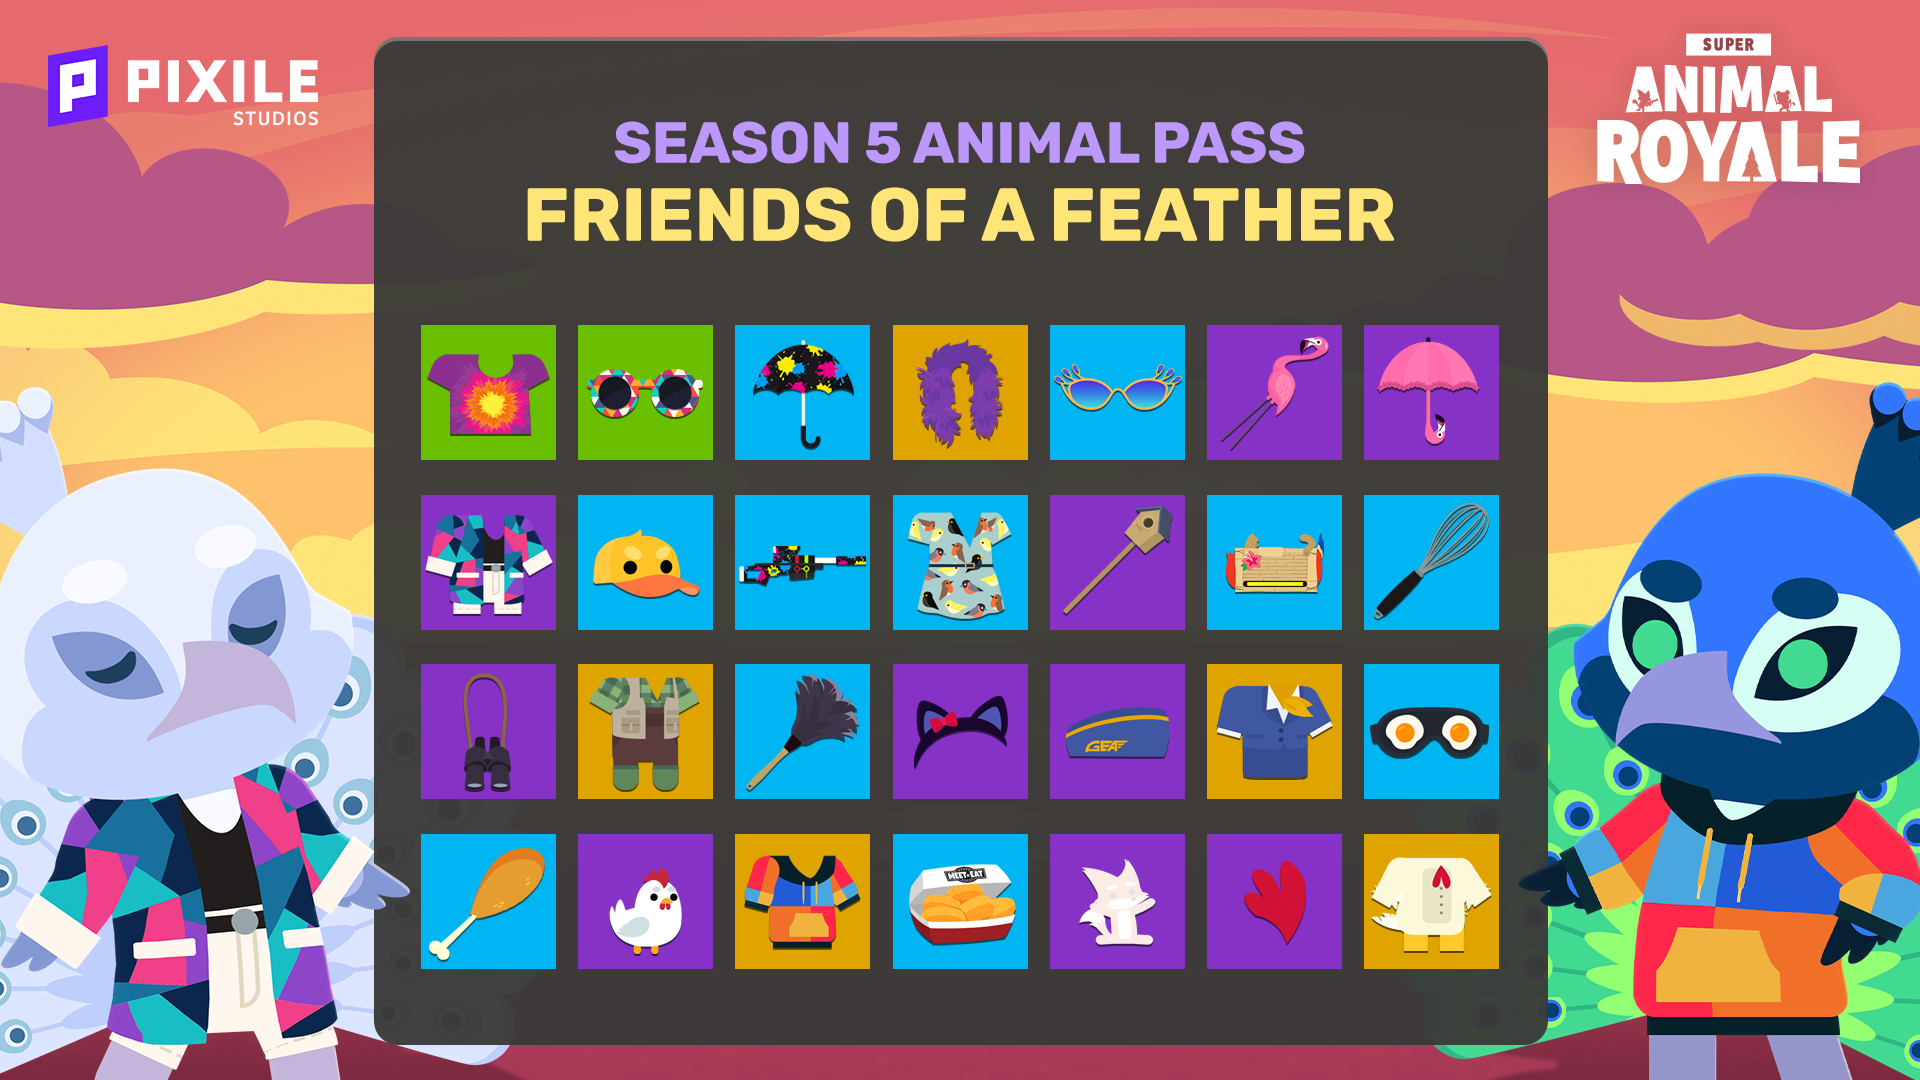 Super Animal Royale Update  Flies Out for Season 5 This September 27